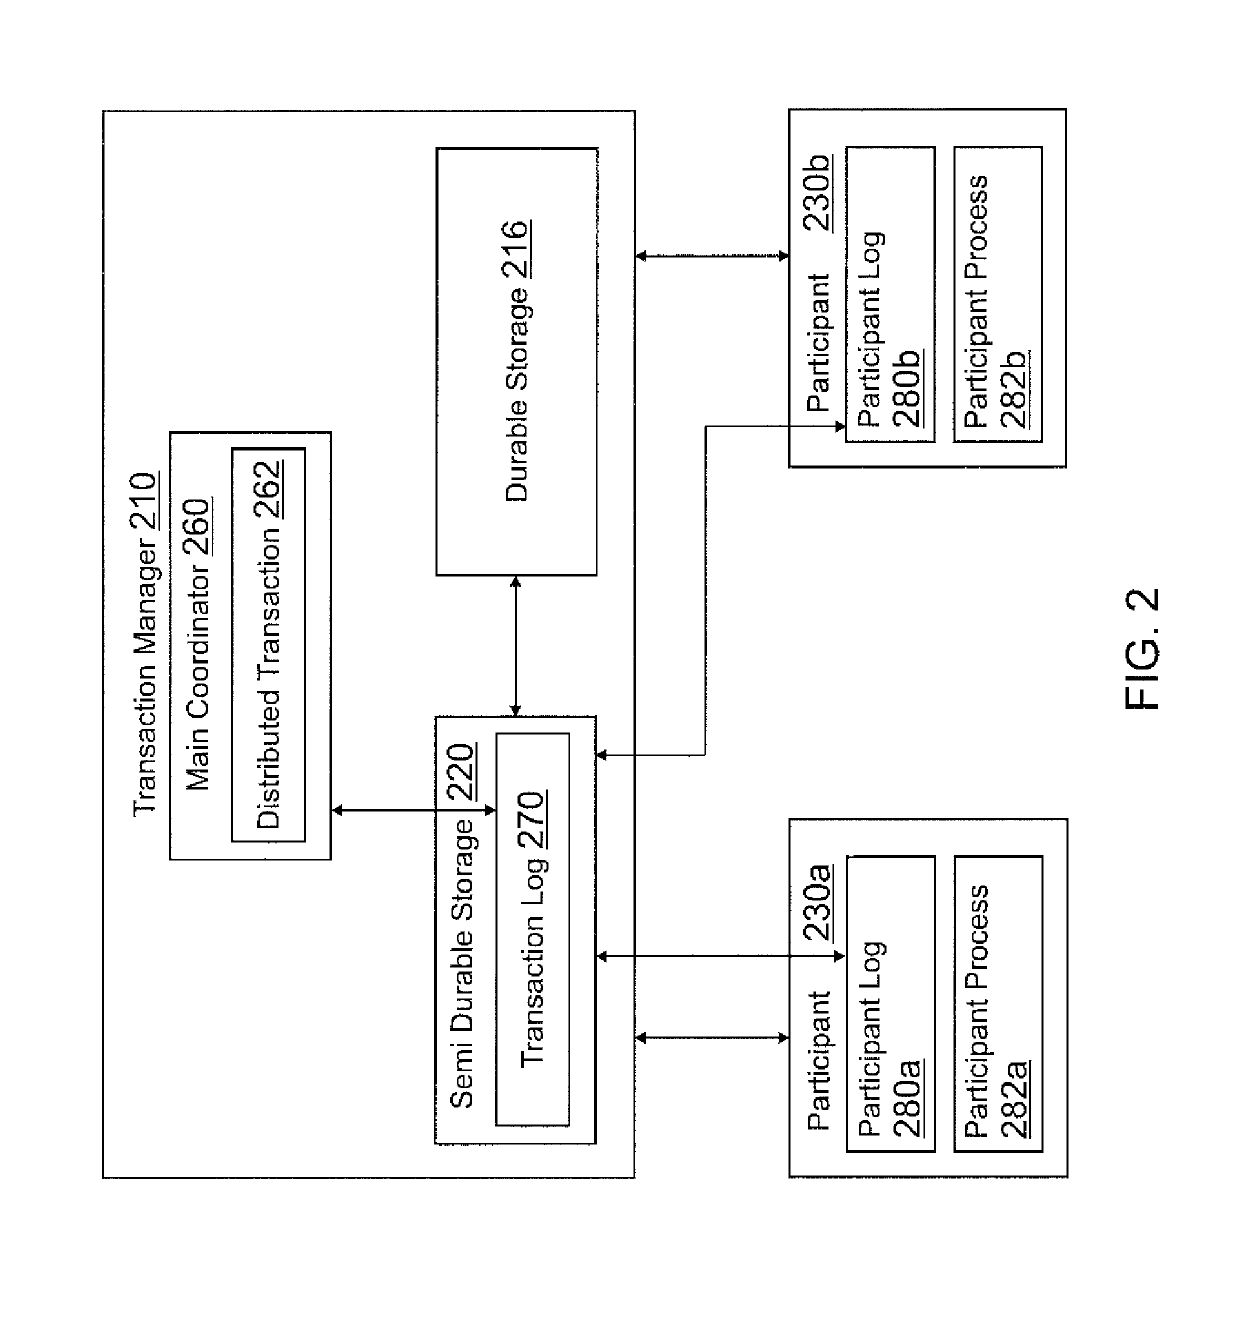 Systems and methods for semi-durable transaction log storage in two-phase commit protocol transaction processing